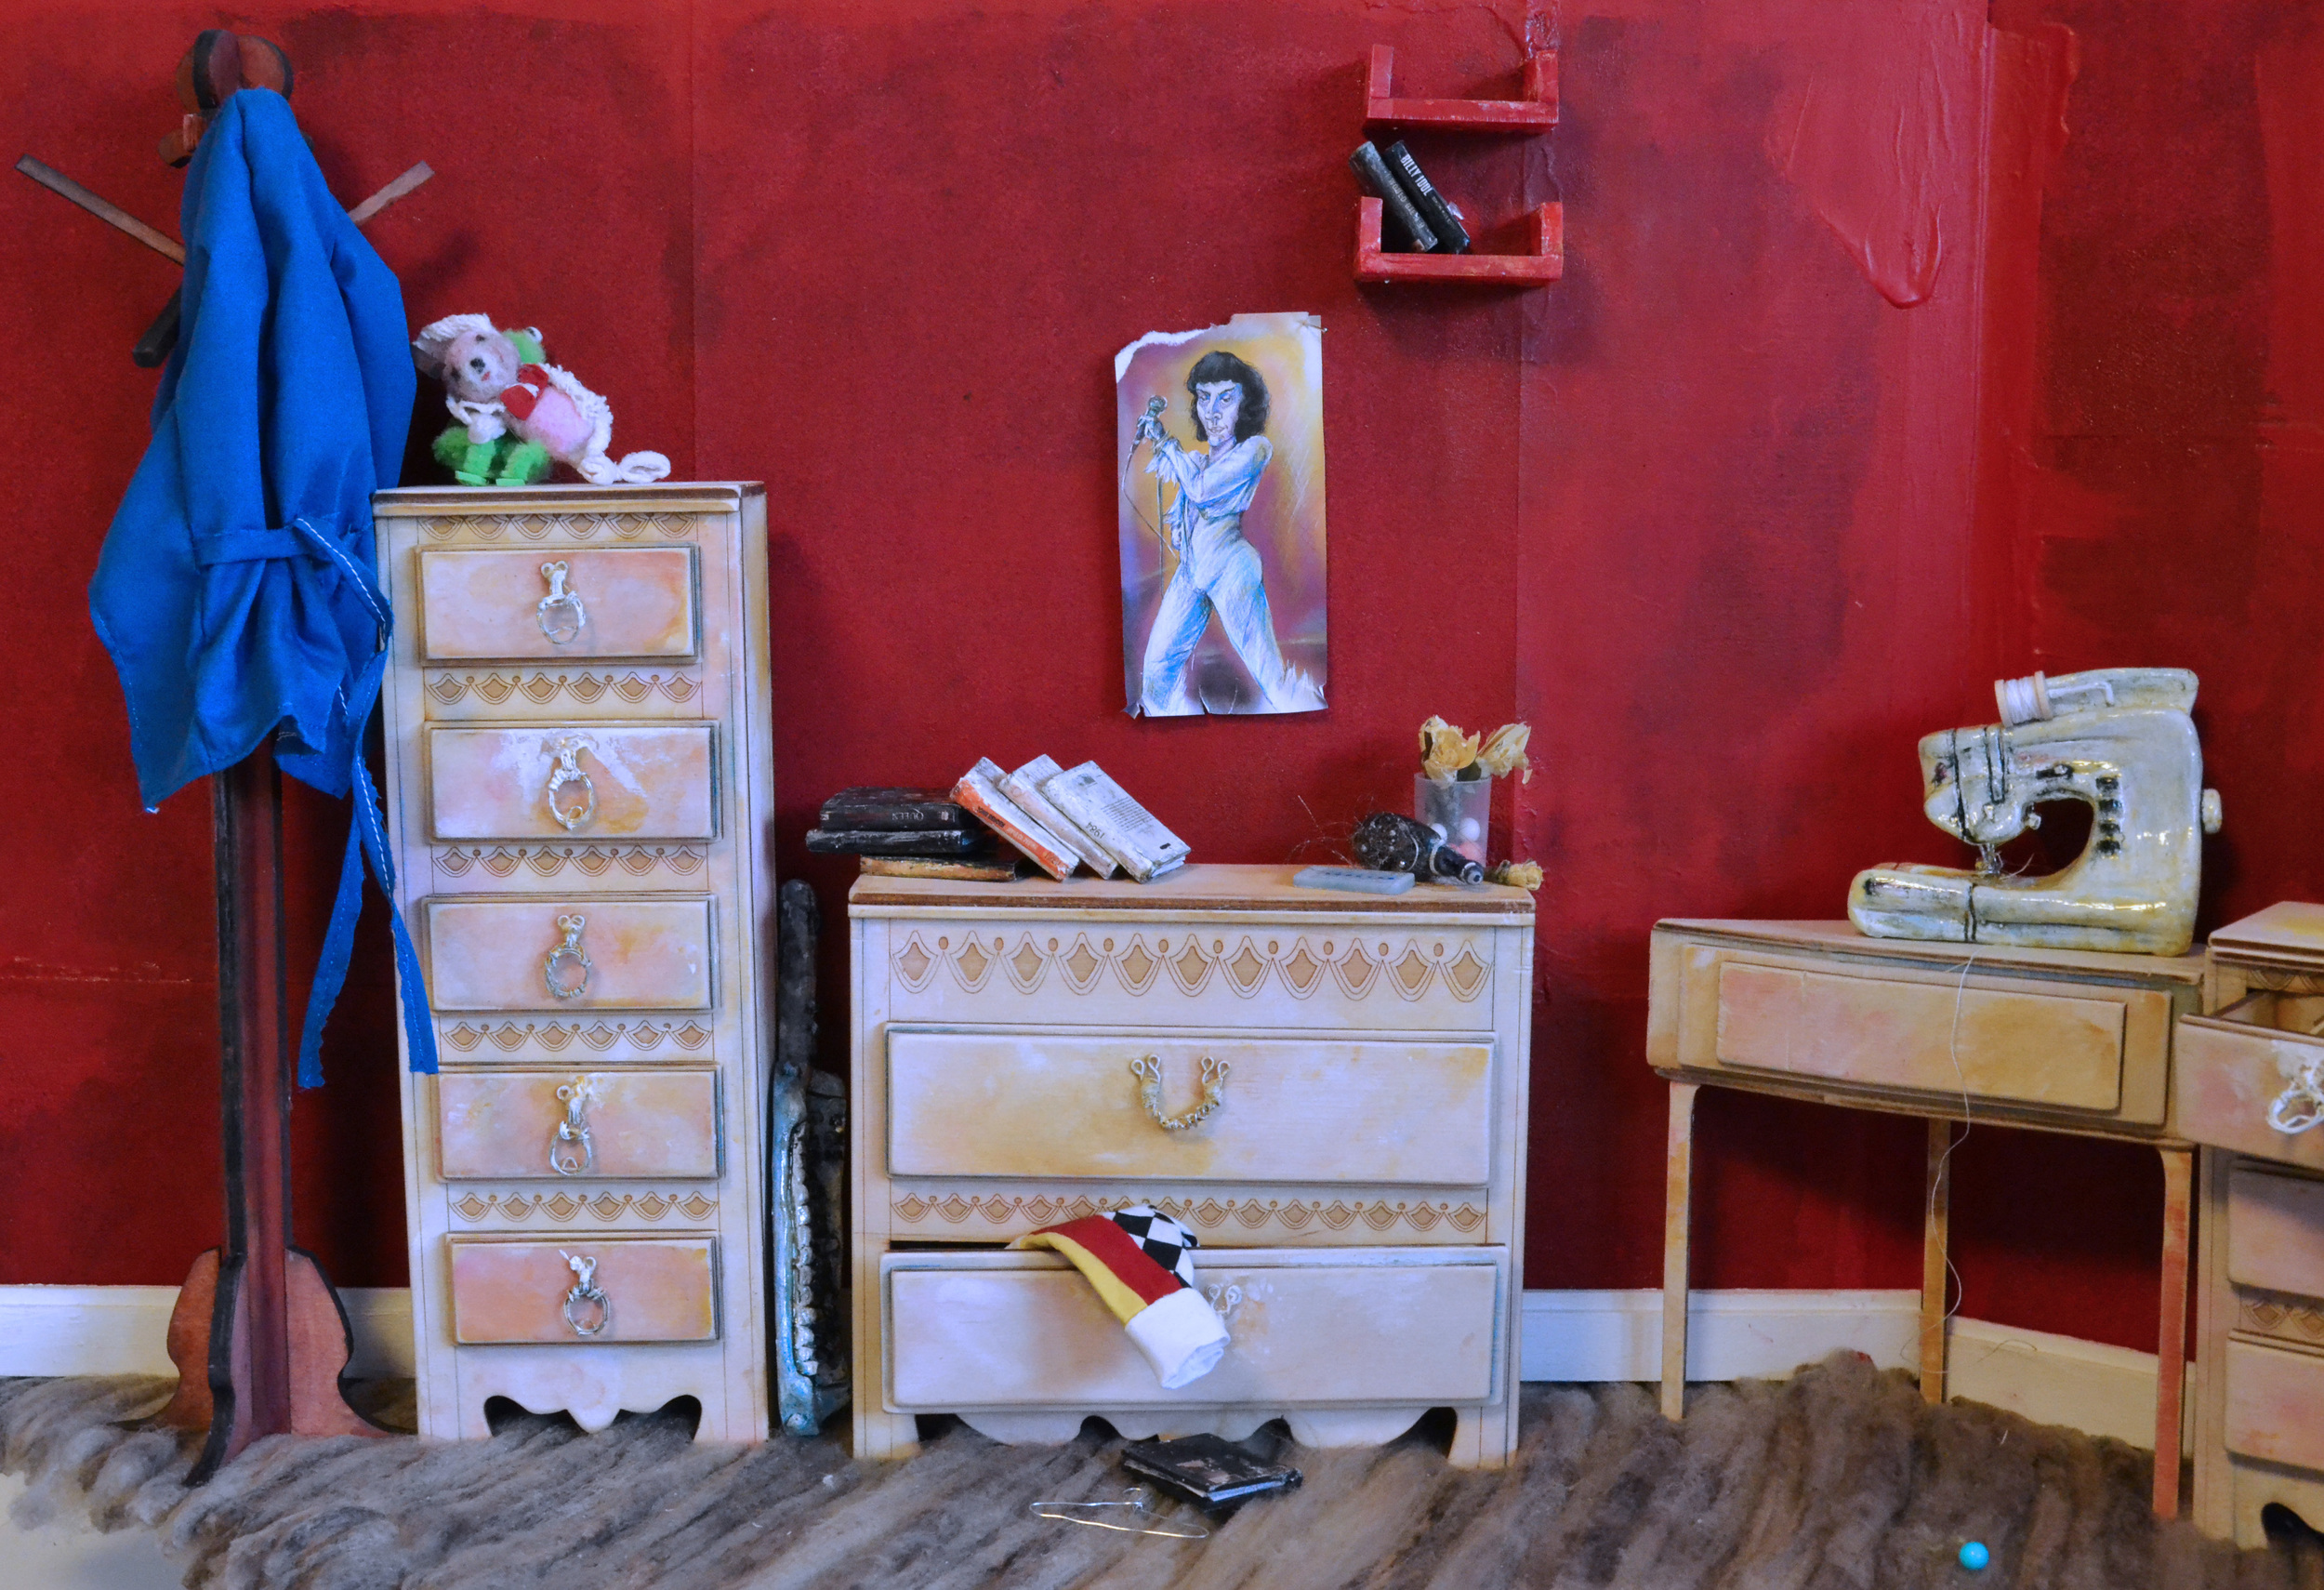  Miniature books and red plastic shelves are laser-cut.  Miniature &nbsp;sewing machine is resin and found object made.  Clothing is hand sewn.  Flowers are hand made using dried flower petals.&nbsp; 